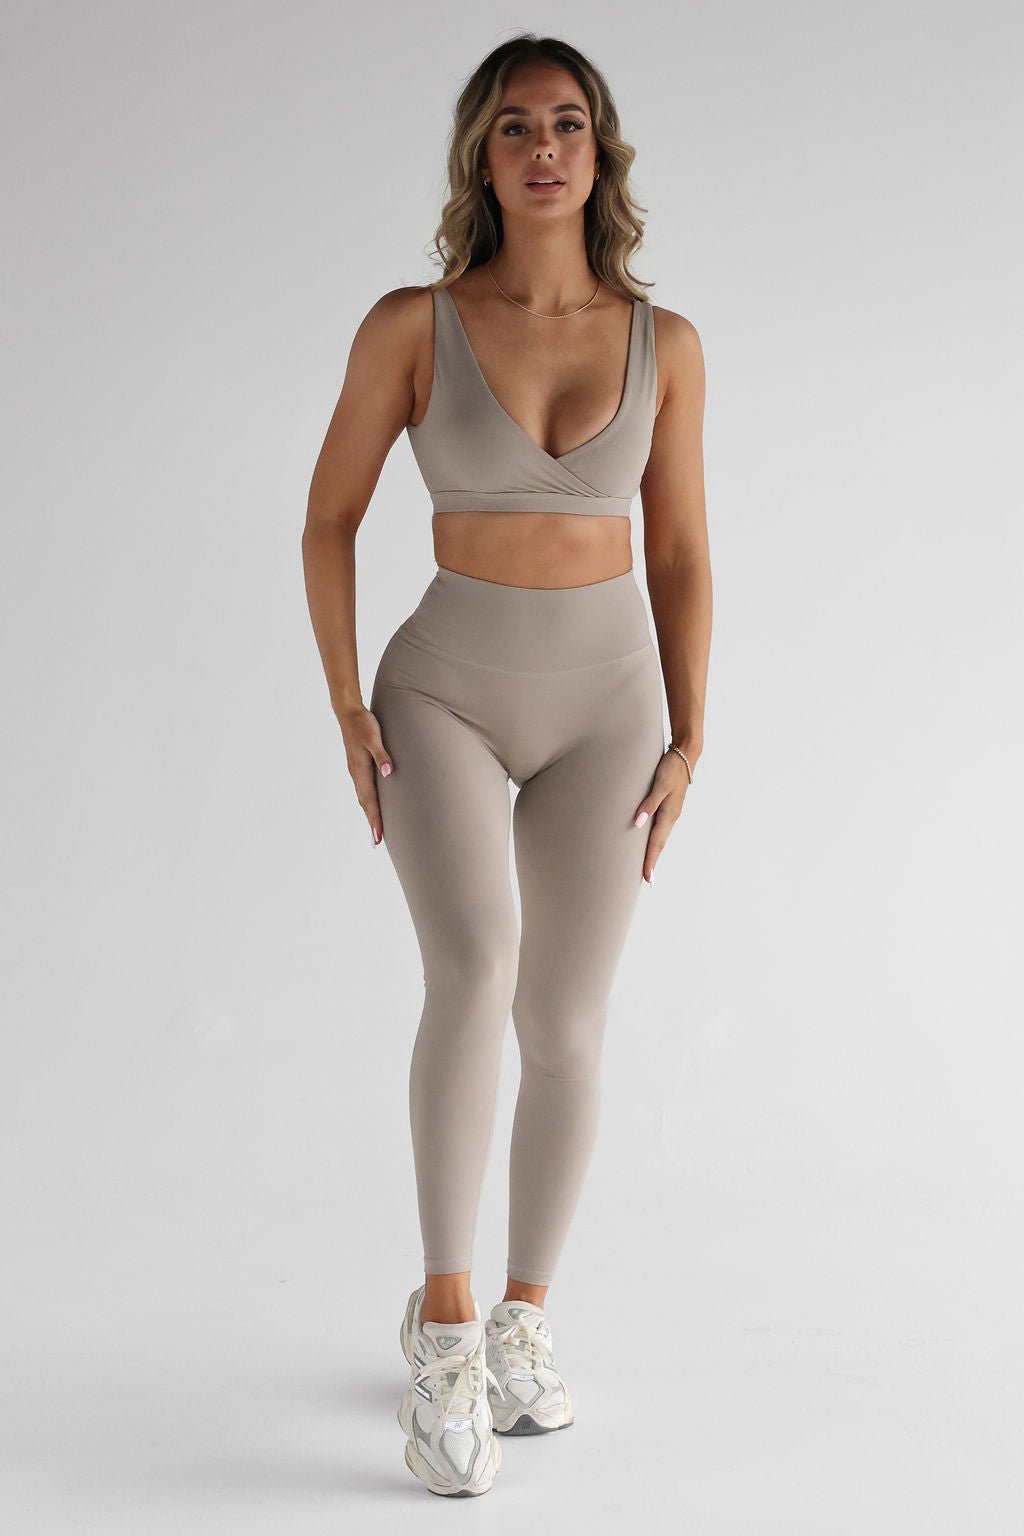 SCULPT Crop - Latte SHIPPING FROM 3/11 - LEELO ACTIVE